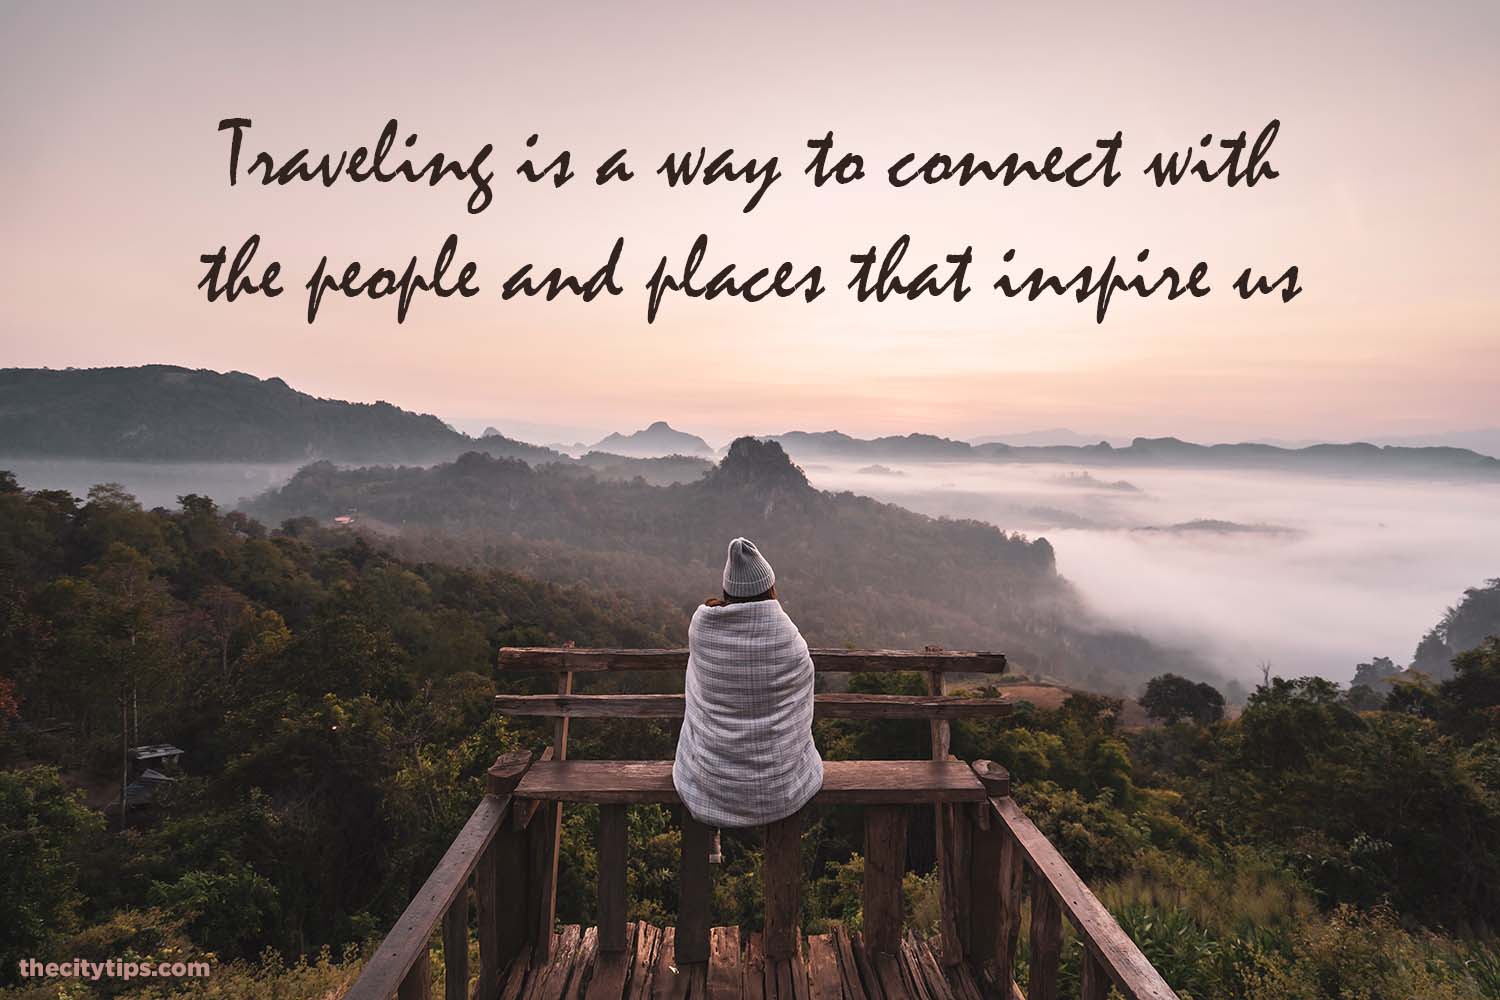 "Traveling is a way to connect with the people and places that inspire us." by Anonymous